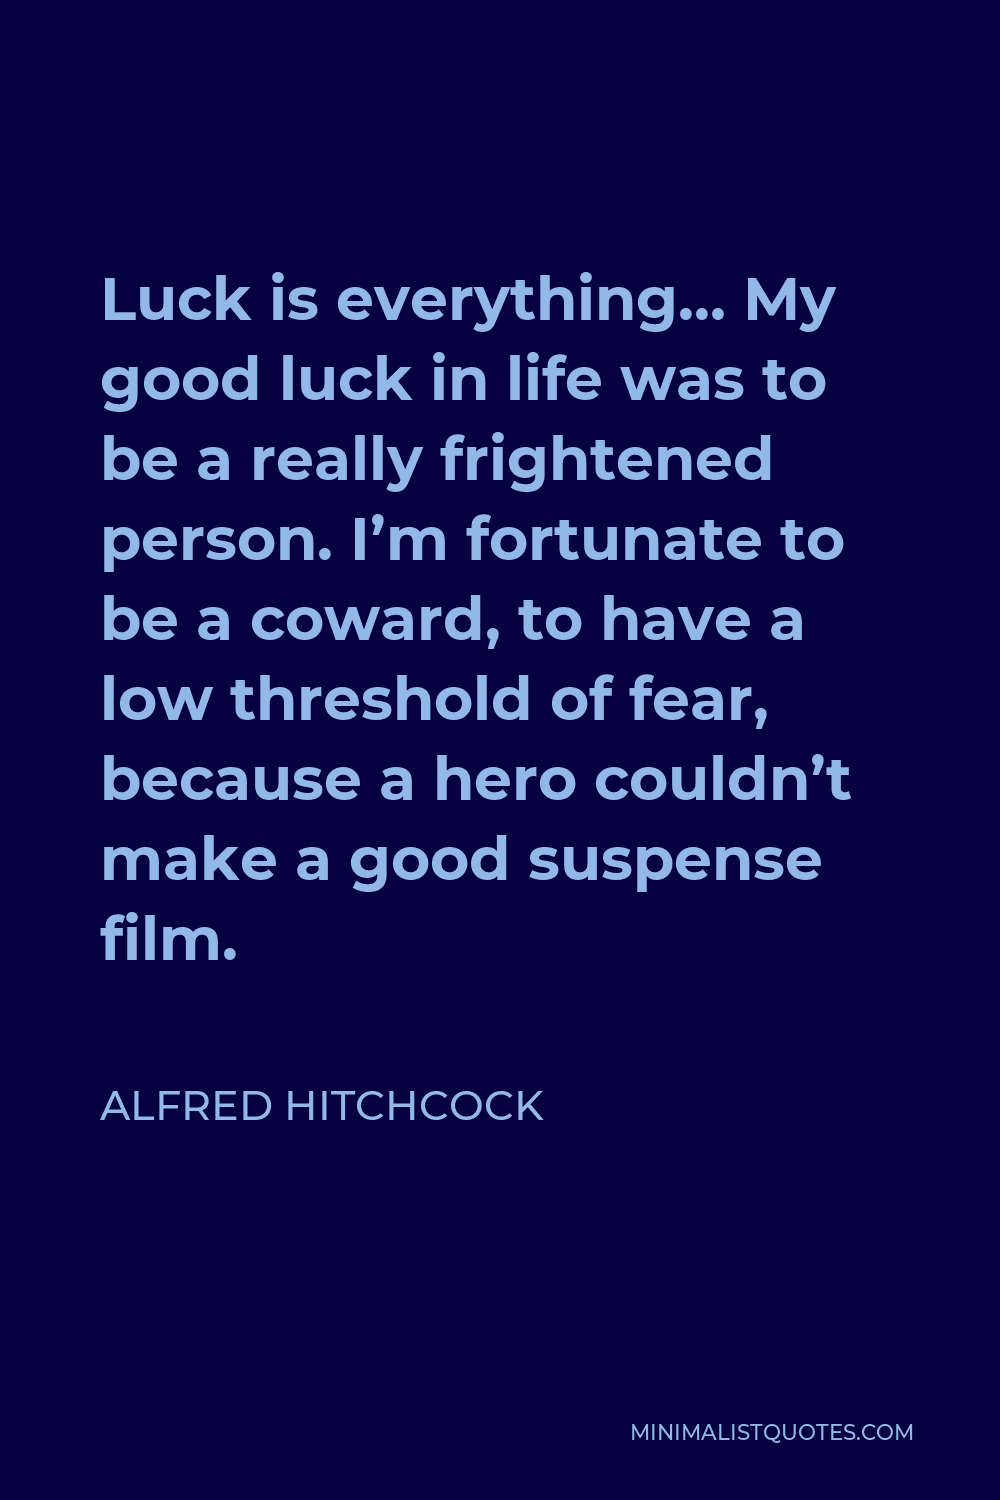 Alfred Hitchcock Quote - Luck is everything… My good luck in life was to be a really frightened person. I’m fortunate to be a coward, to have a low threshold of fear, because a hero couldn’t make a good suspense film.